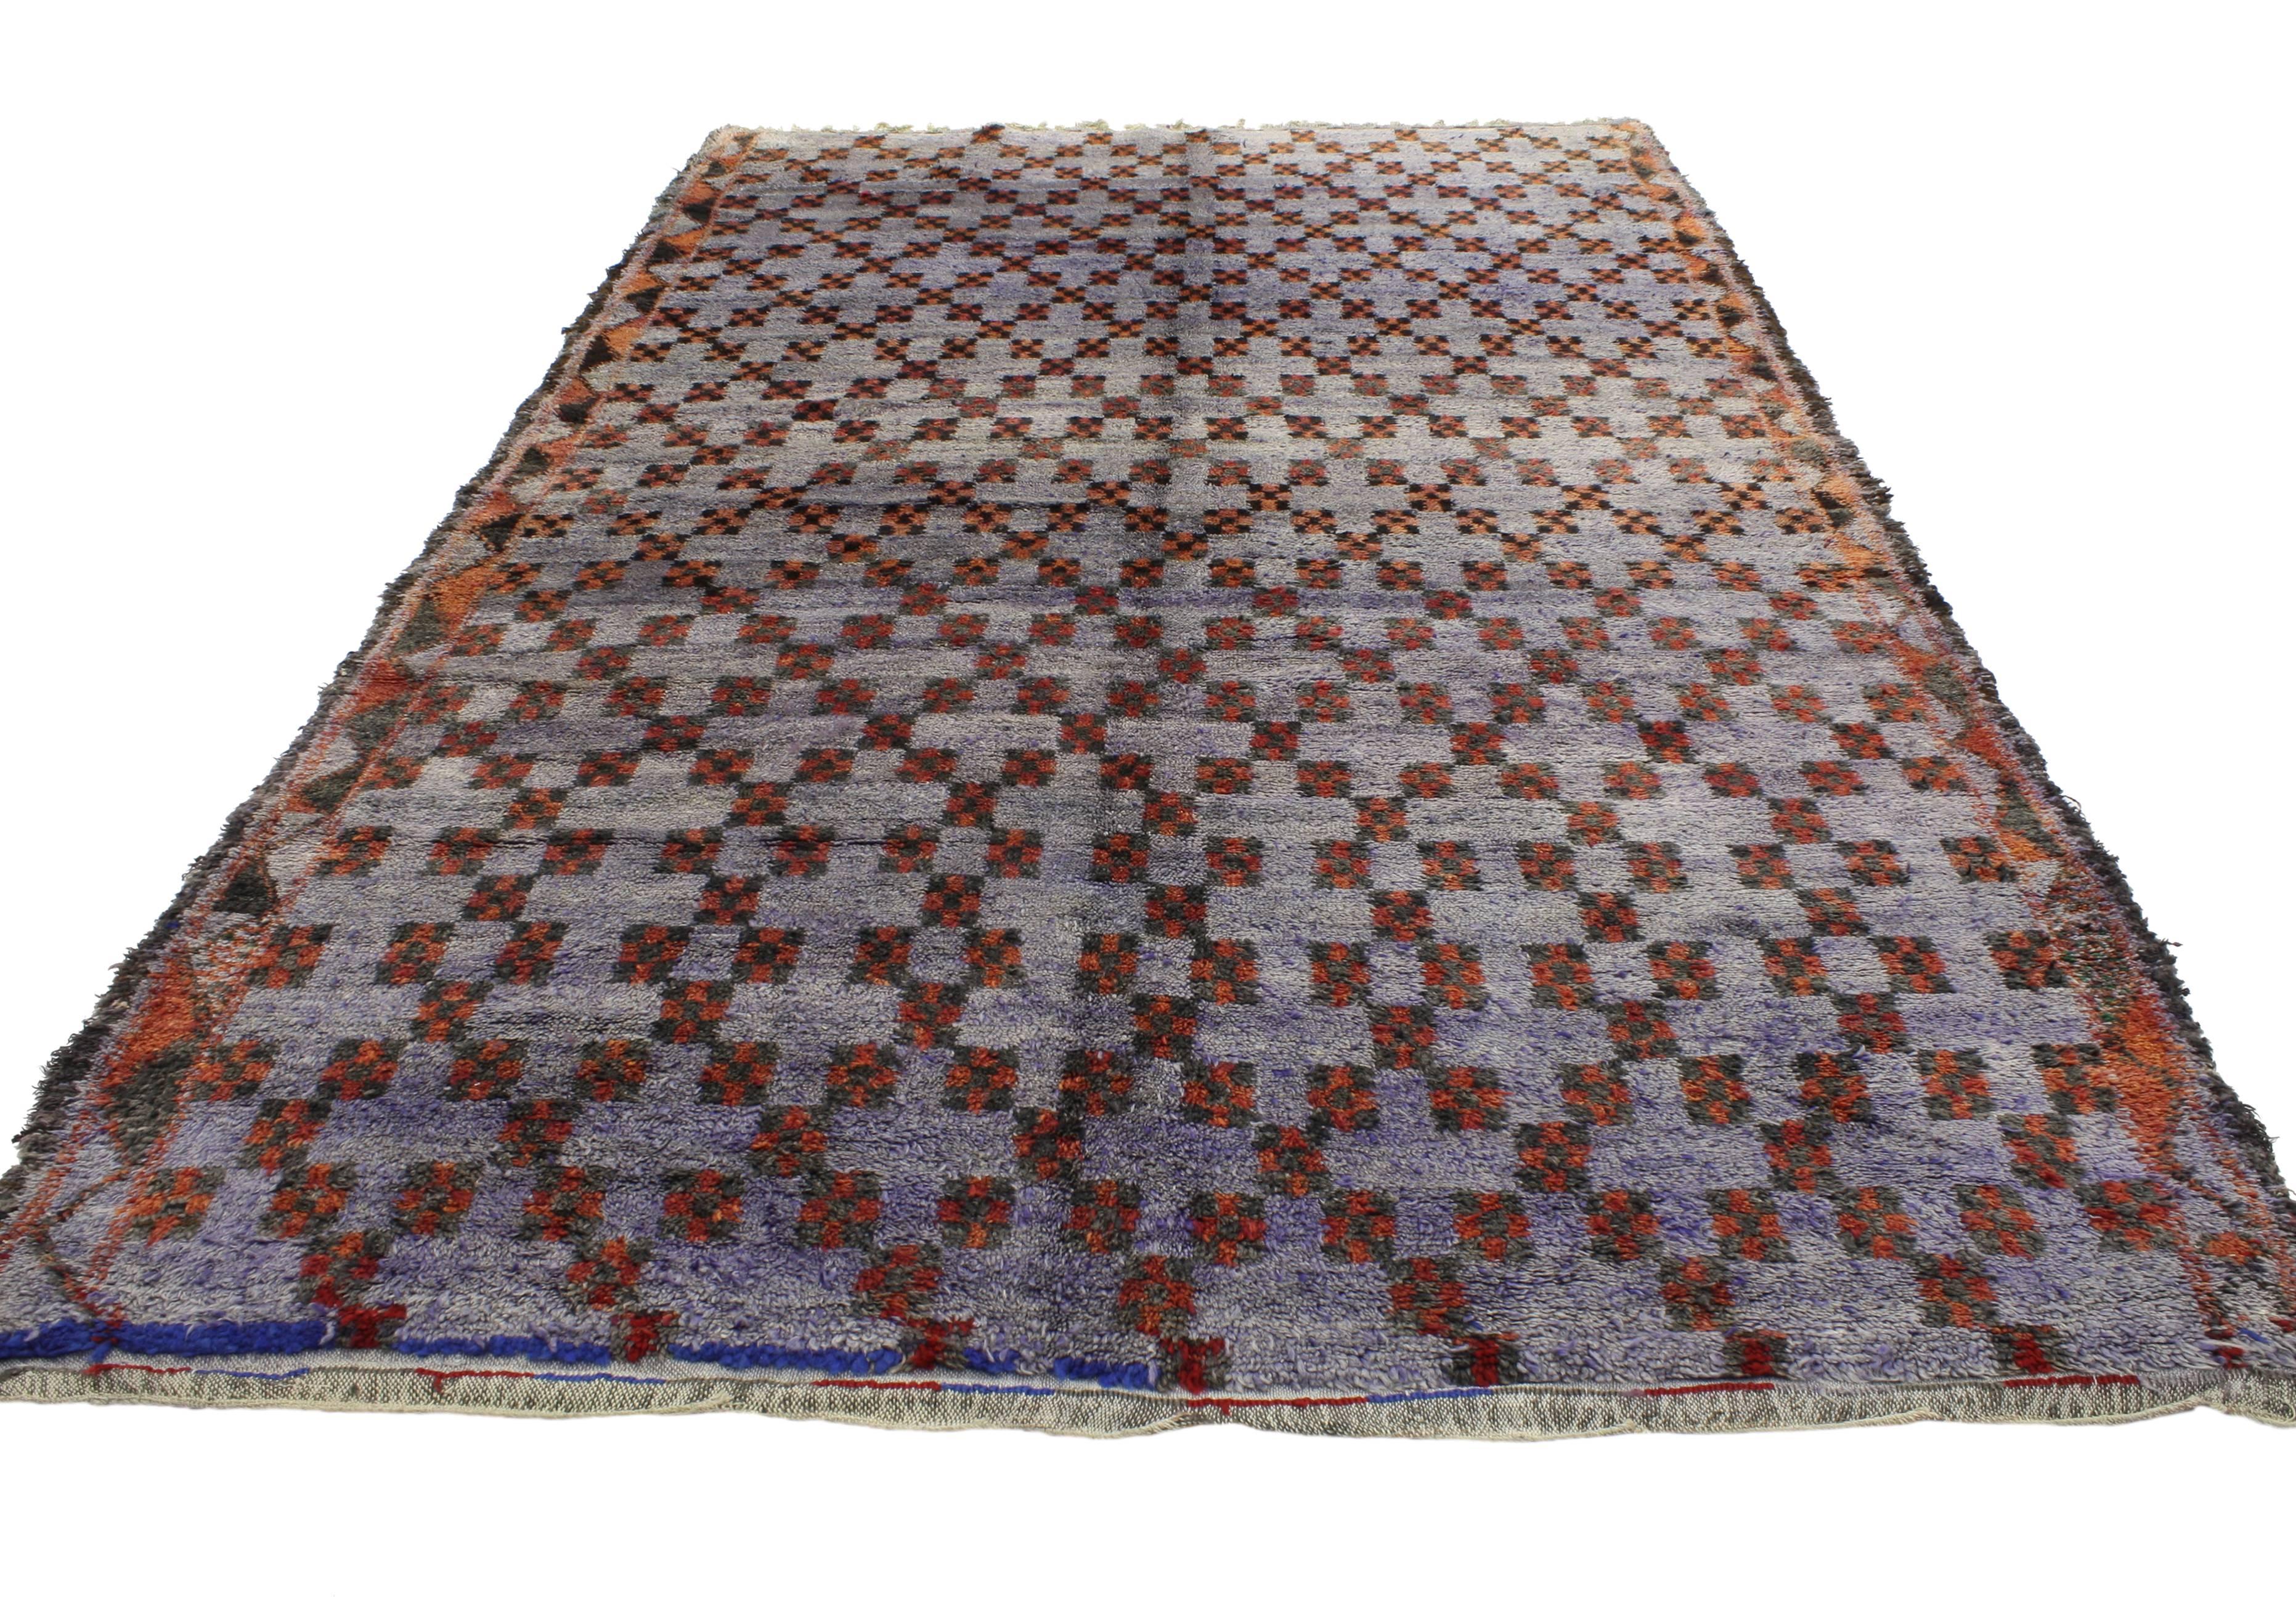 Tribal Vintage Berber Moroccan Rug with Modern Style